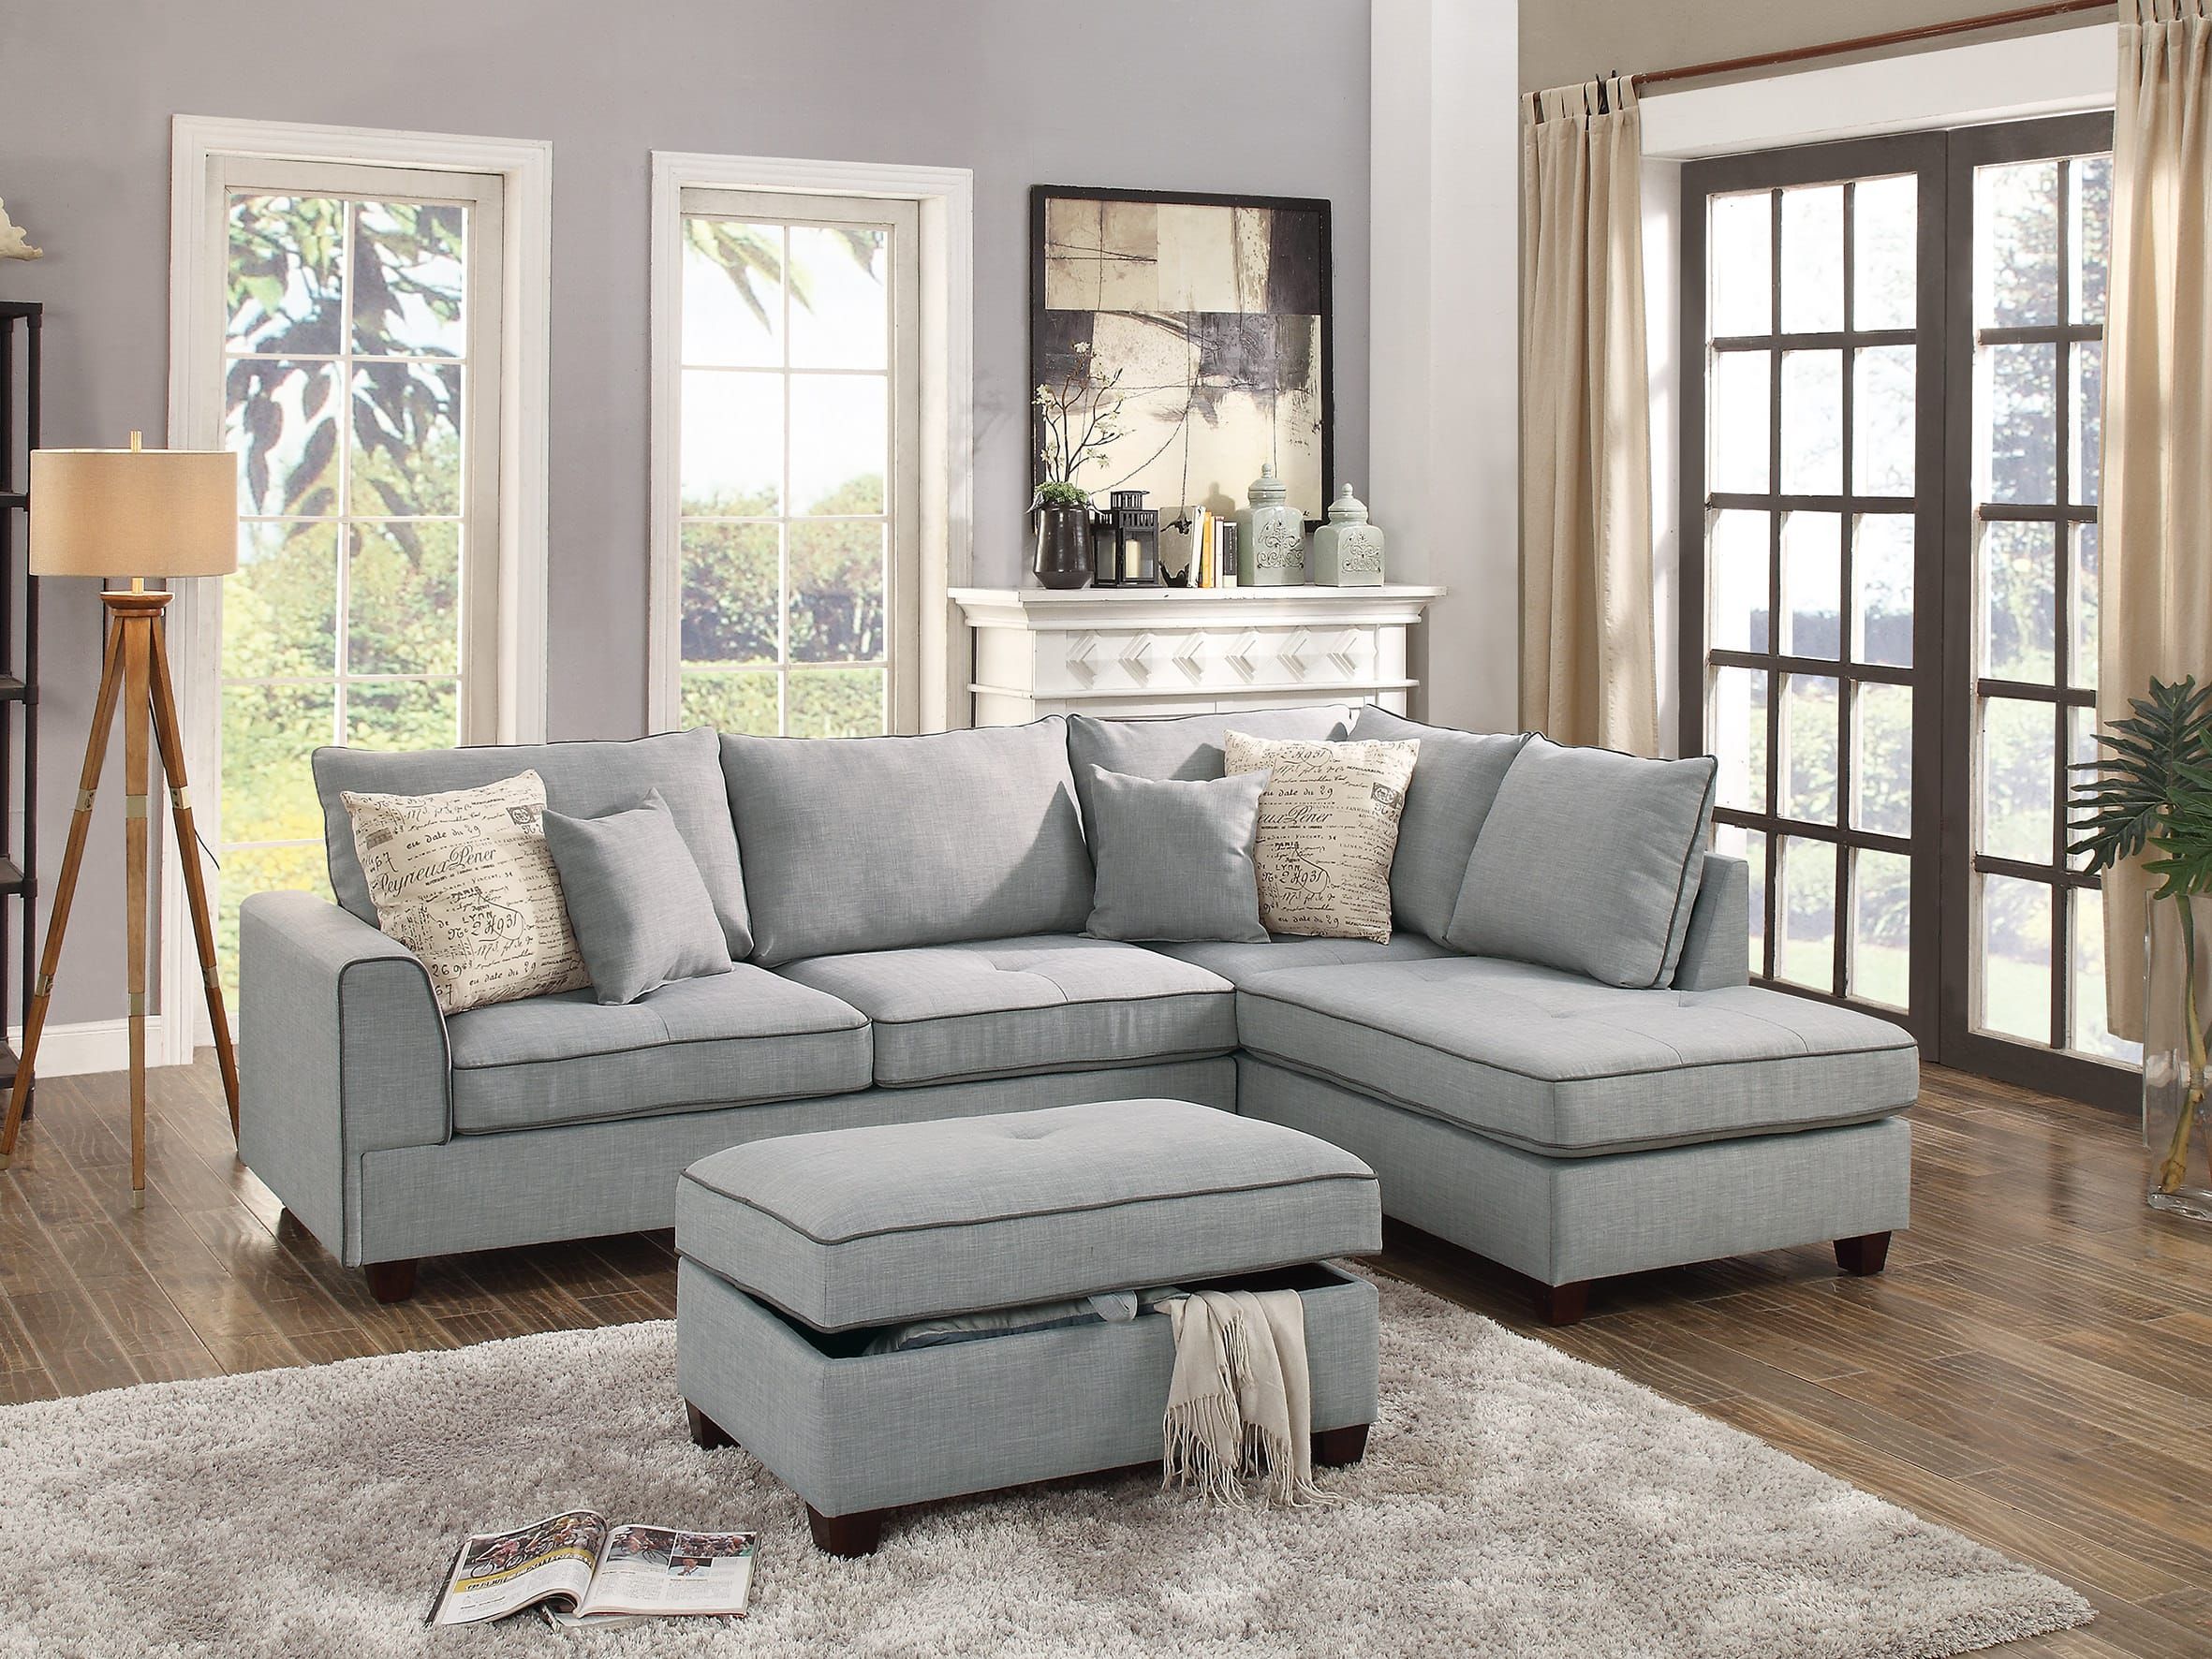 F6543 Light Gray 3 Pcs Sectional Sofa Setpoundex Within Sofas In Light Gray (View 11 of 22)